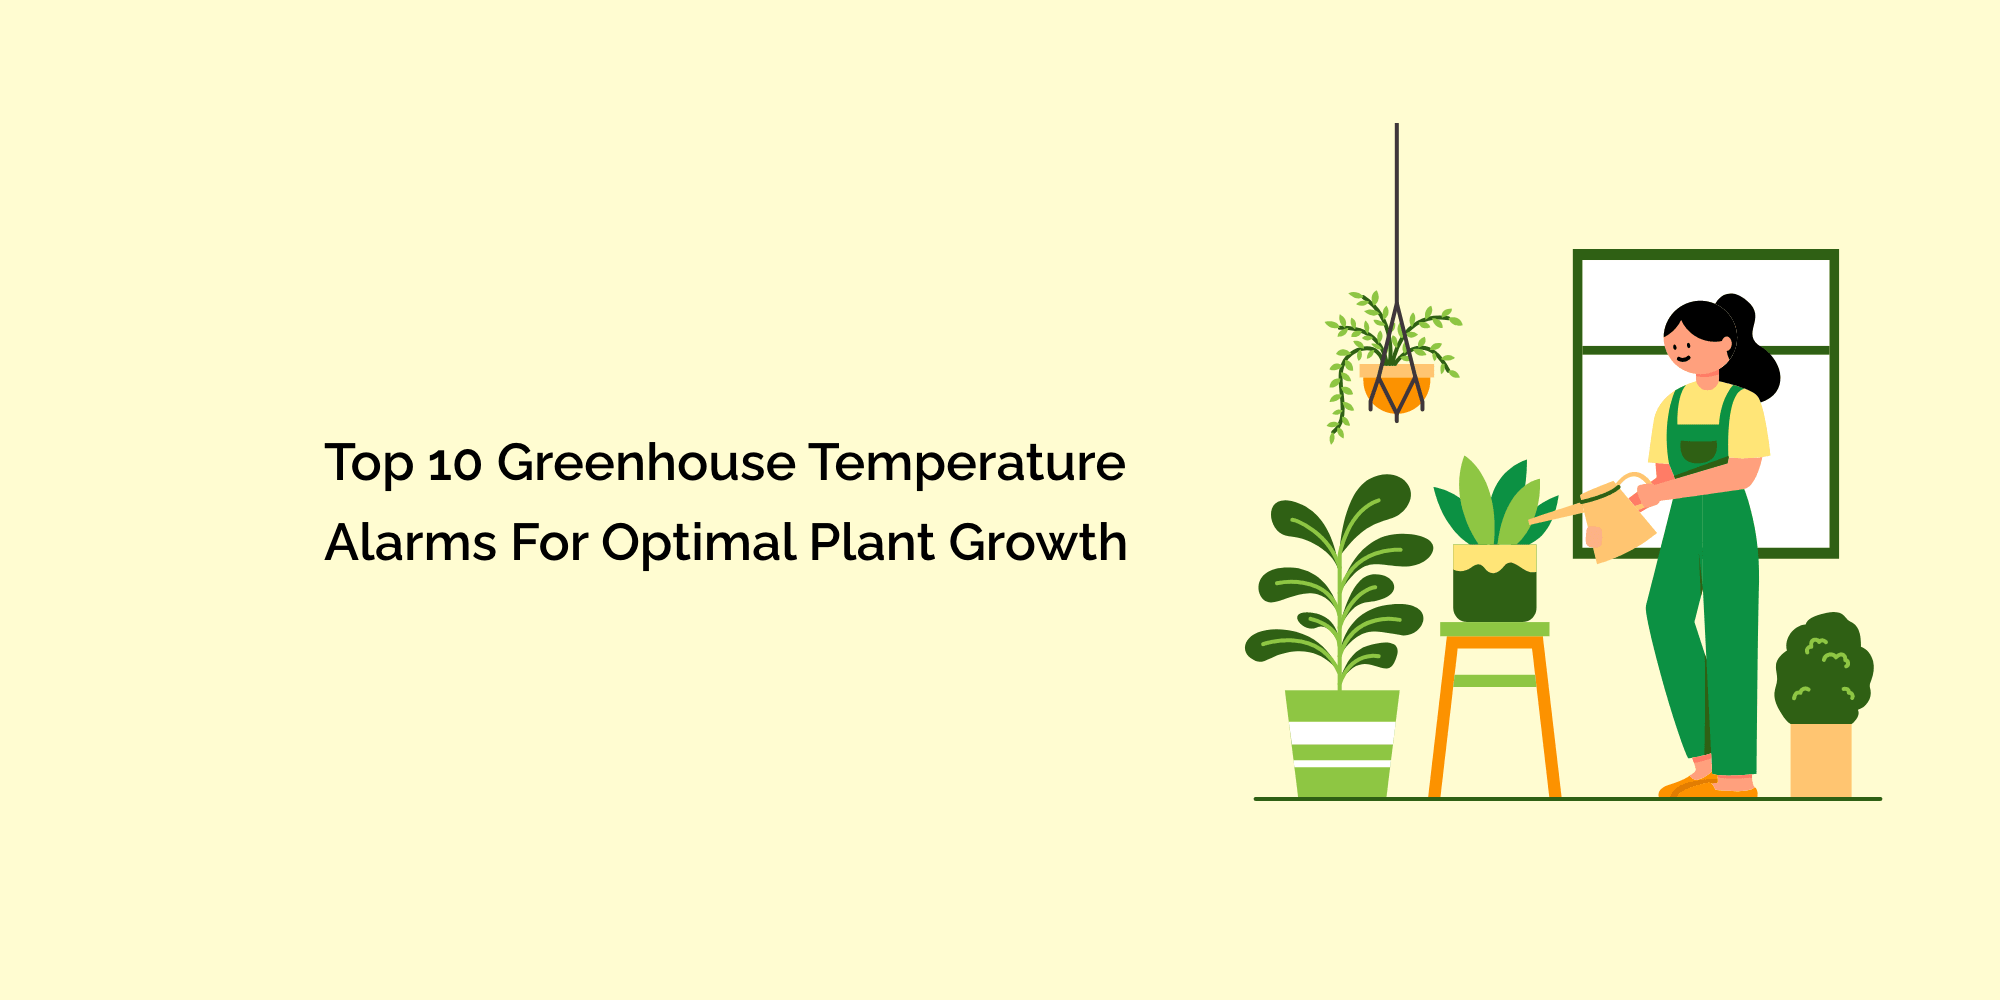 Top 10 Greenhouse Temperature Alarms for Optimal Plant Growth